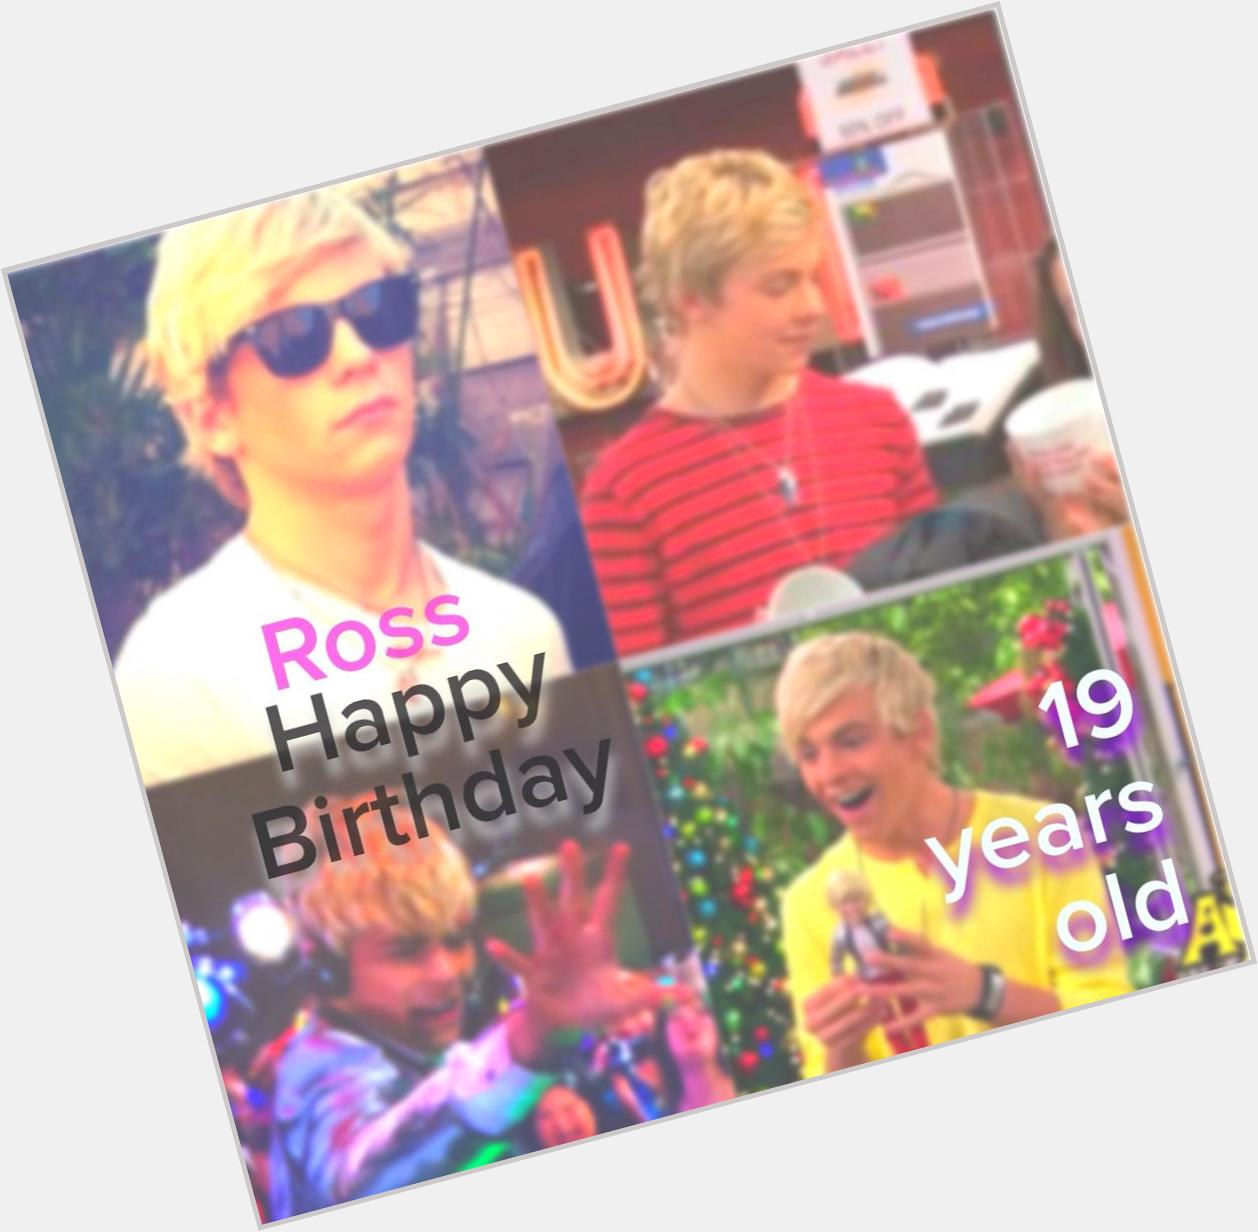 Ross Lynch*
HAPPY BIRTHDAY  Really cool   A dance and a song are great; is good! Congratulations on 19 years old  